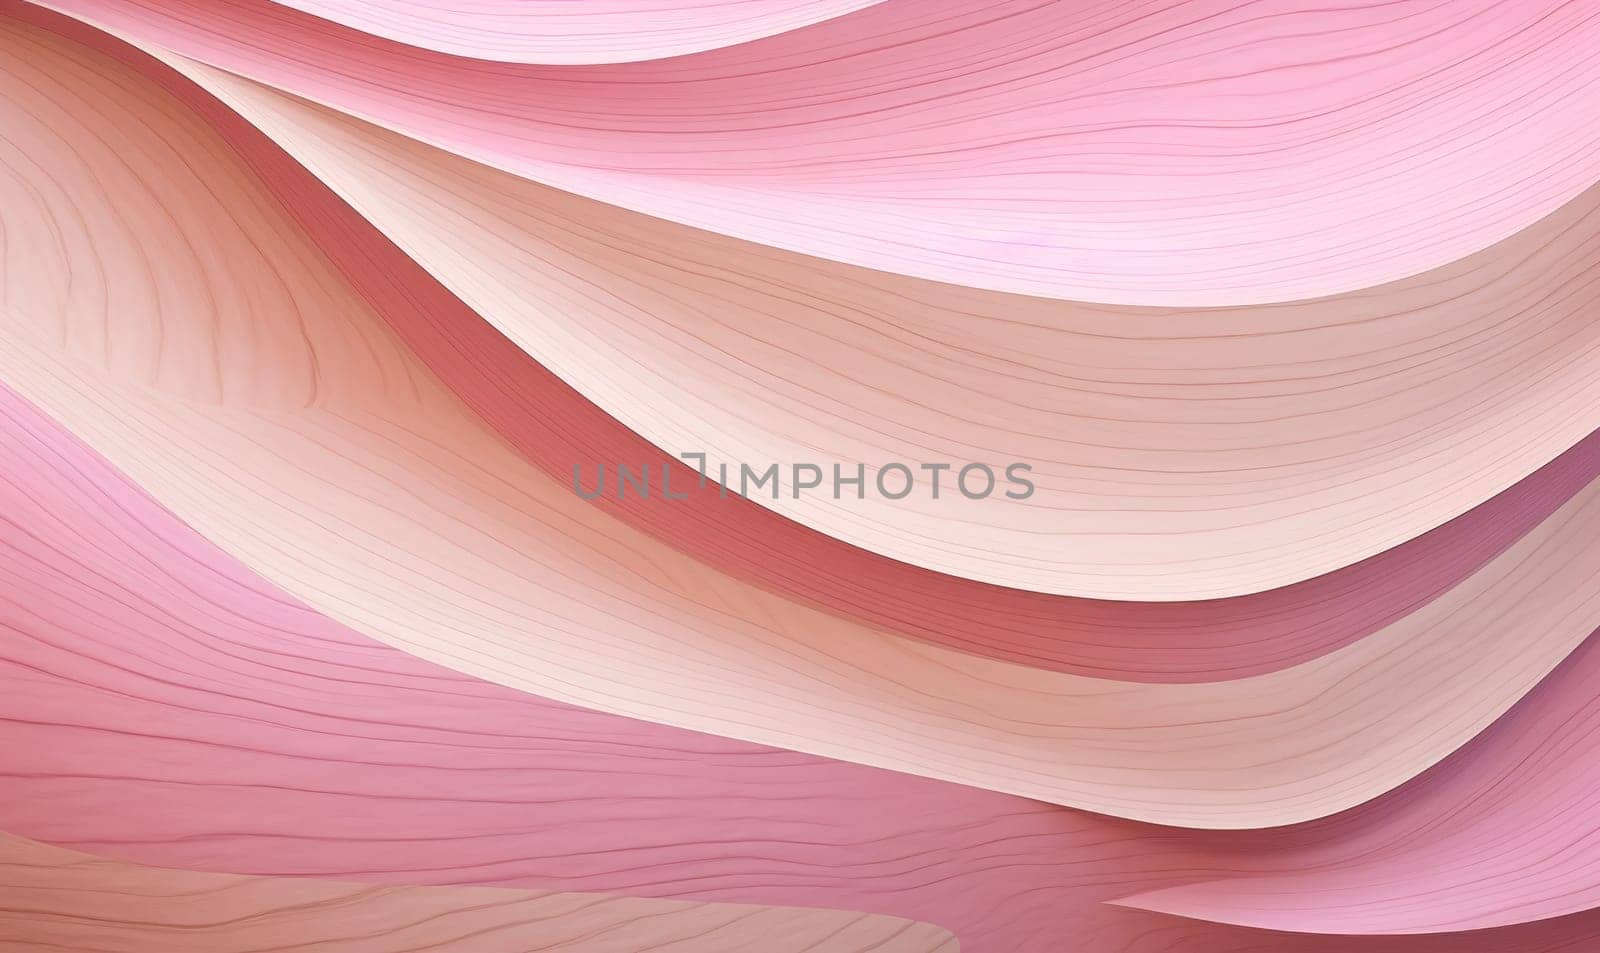 Abstract, wavy, pink background with wood texture. by Yurich32